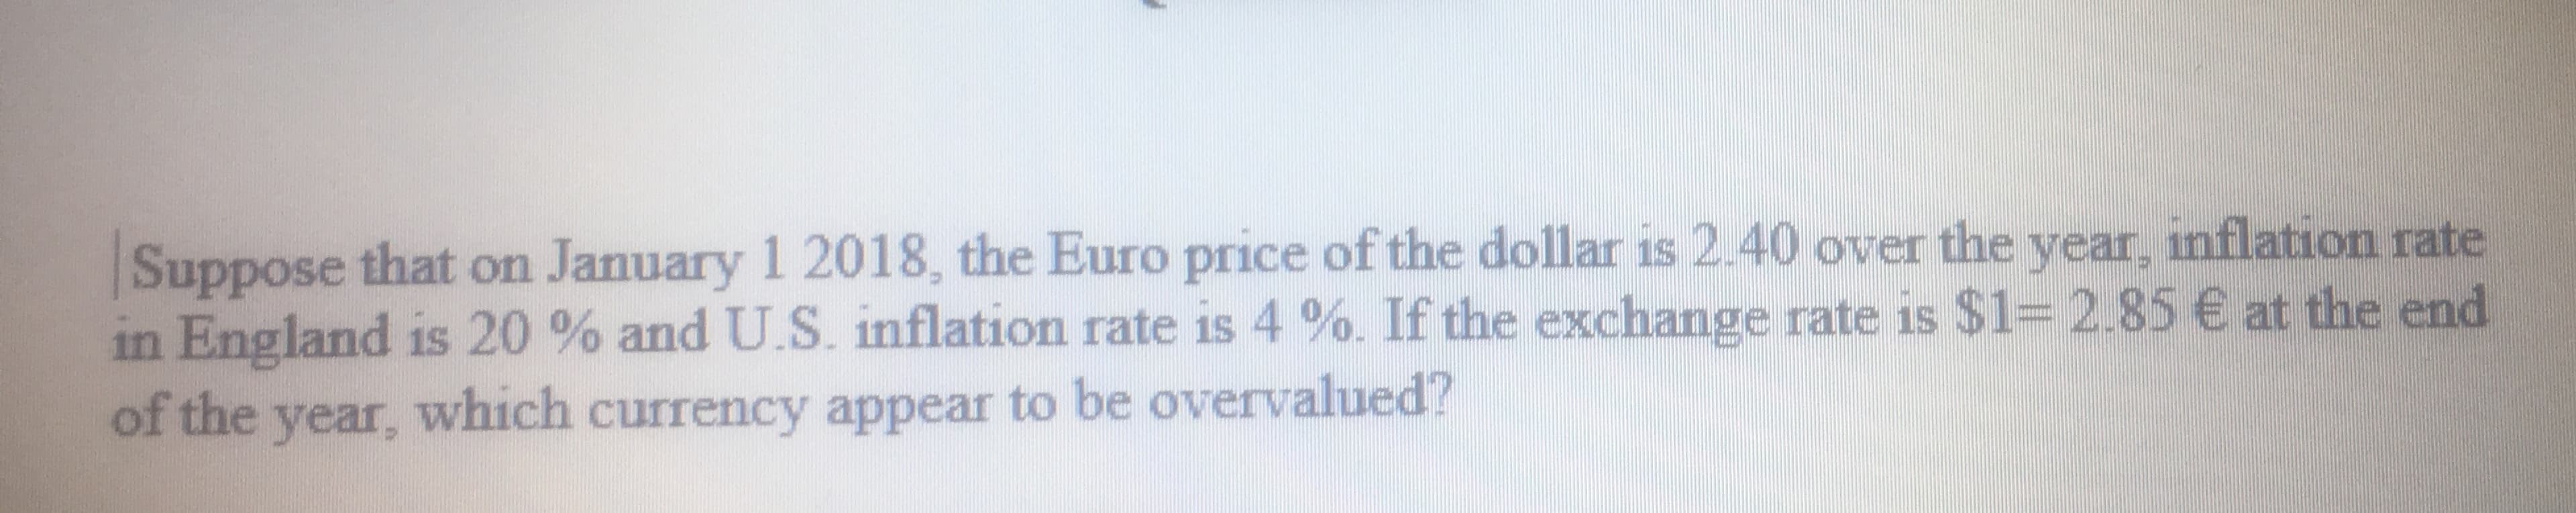 Suppose that on January 1 2018, the Euro price of the dollar is 2.40 over the year, inflation rate
in England is 20 % and U.S. inflation rate is 4 %. If the exchange rate is $1= 2.85€ at the end
of the year, which currency appear to be overvalued?
